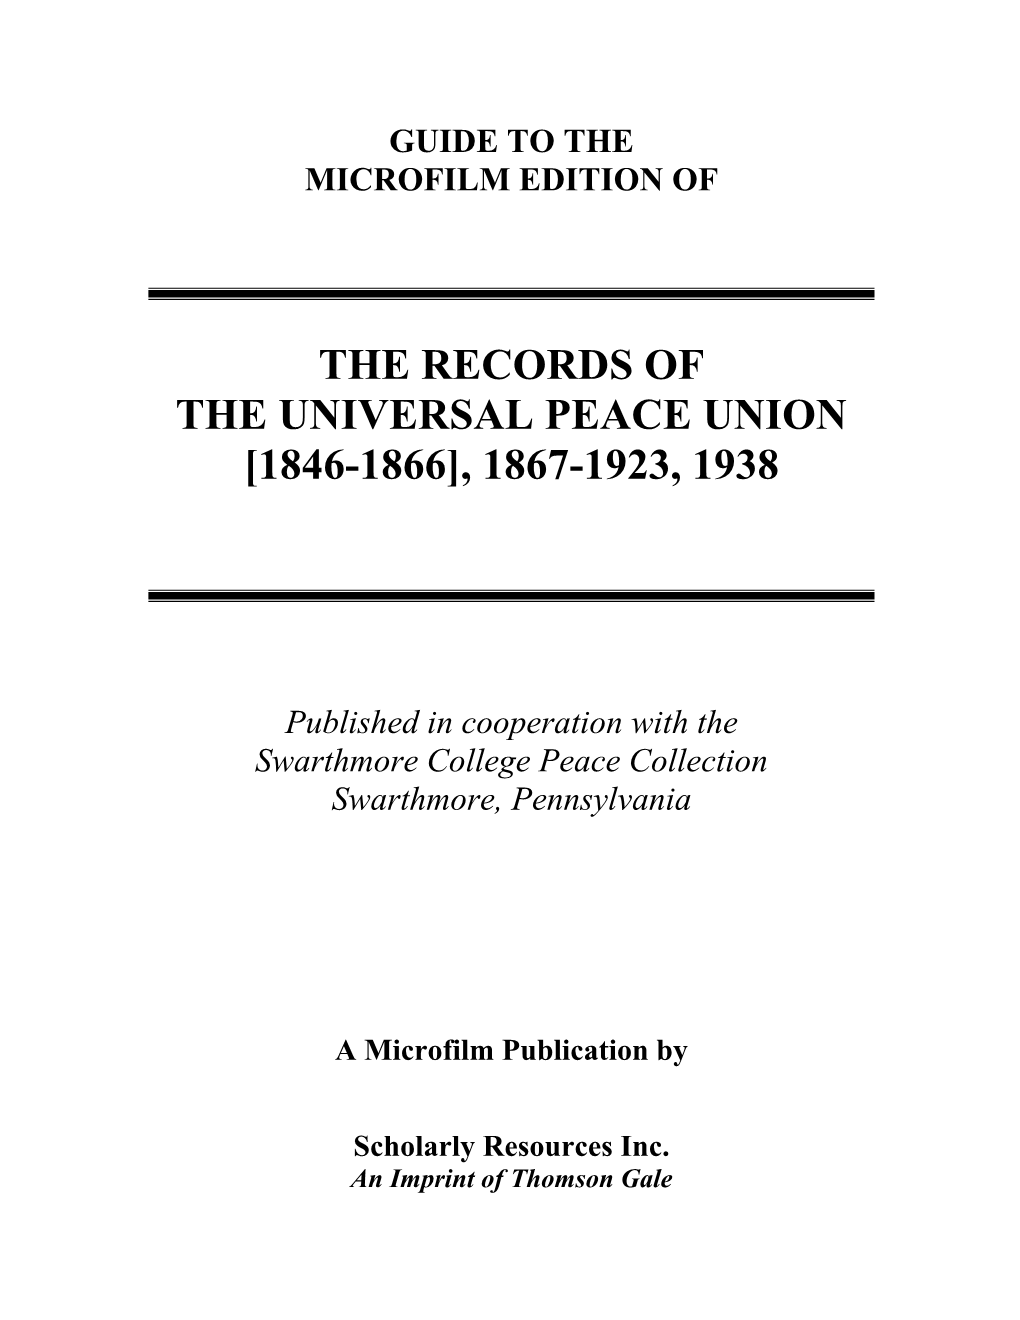 The Records of the Universal Peace Union [1846-1866], 1867-1923, 1938